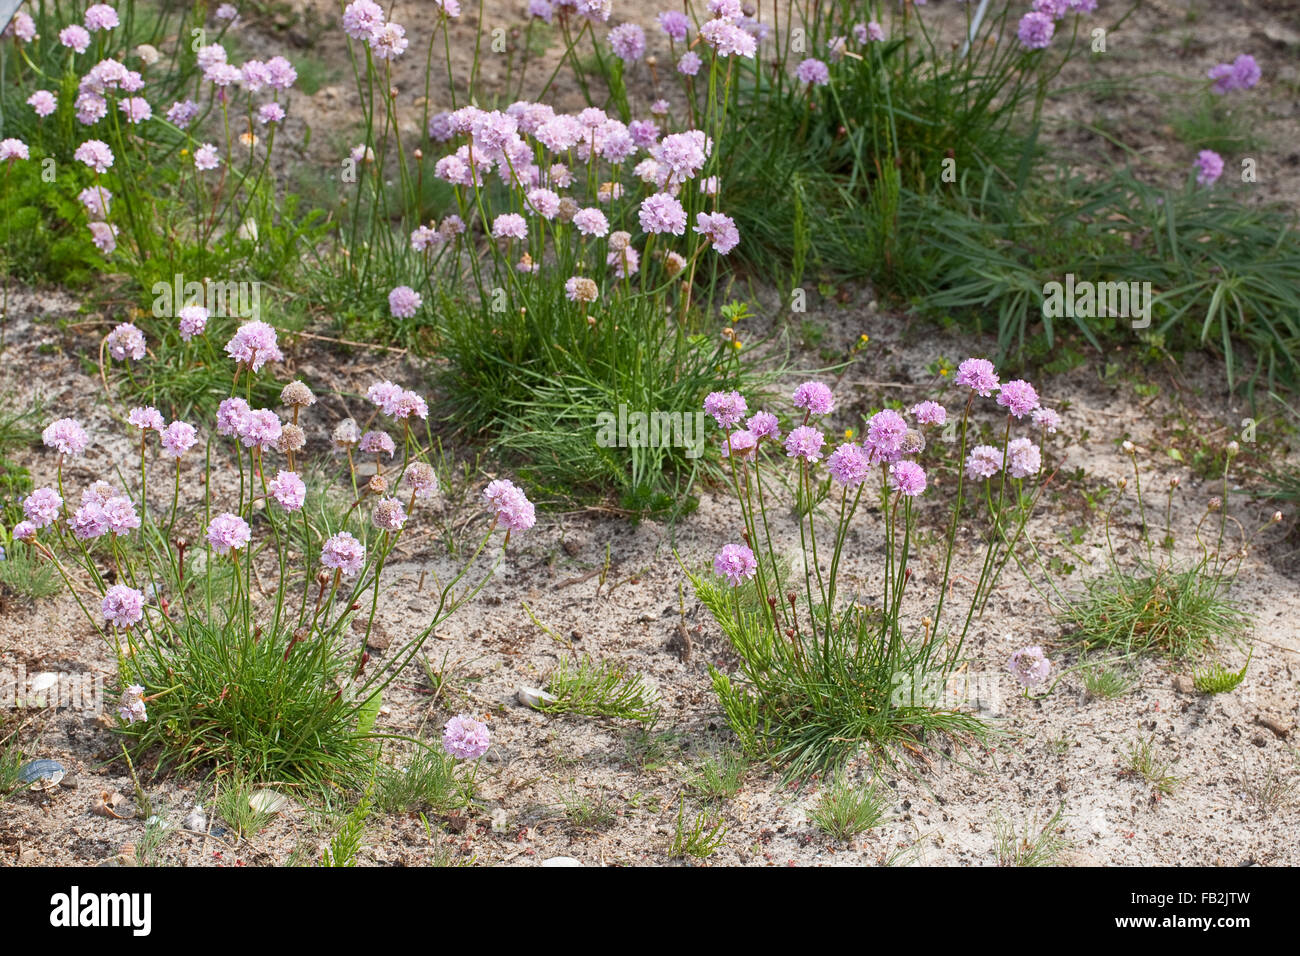 Common Thrift, sea thrift, sea pink, Strand-Grasnelke, Strandgrasnelke, Grasnelke, Armeria maritima, L'armérie maritime Stock Photo